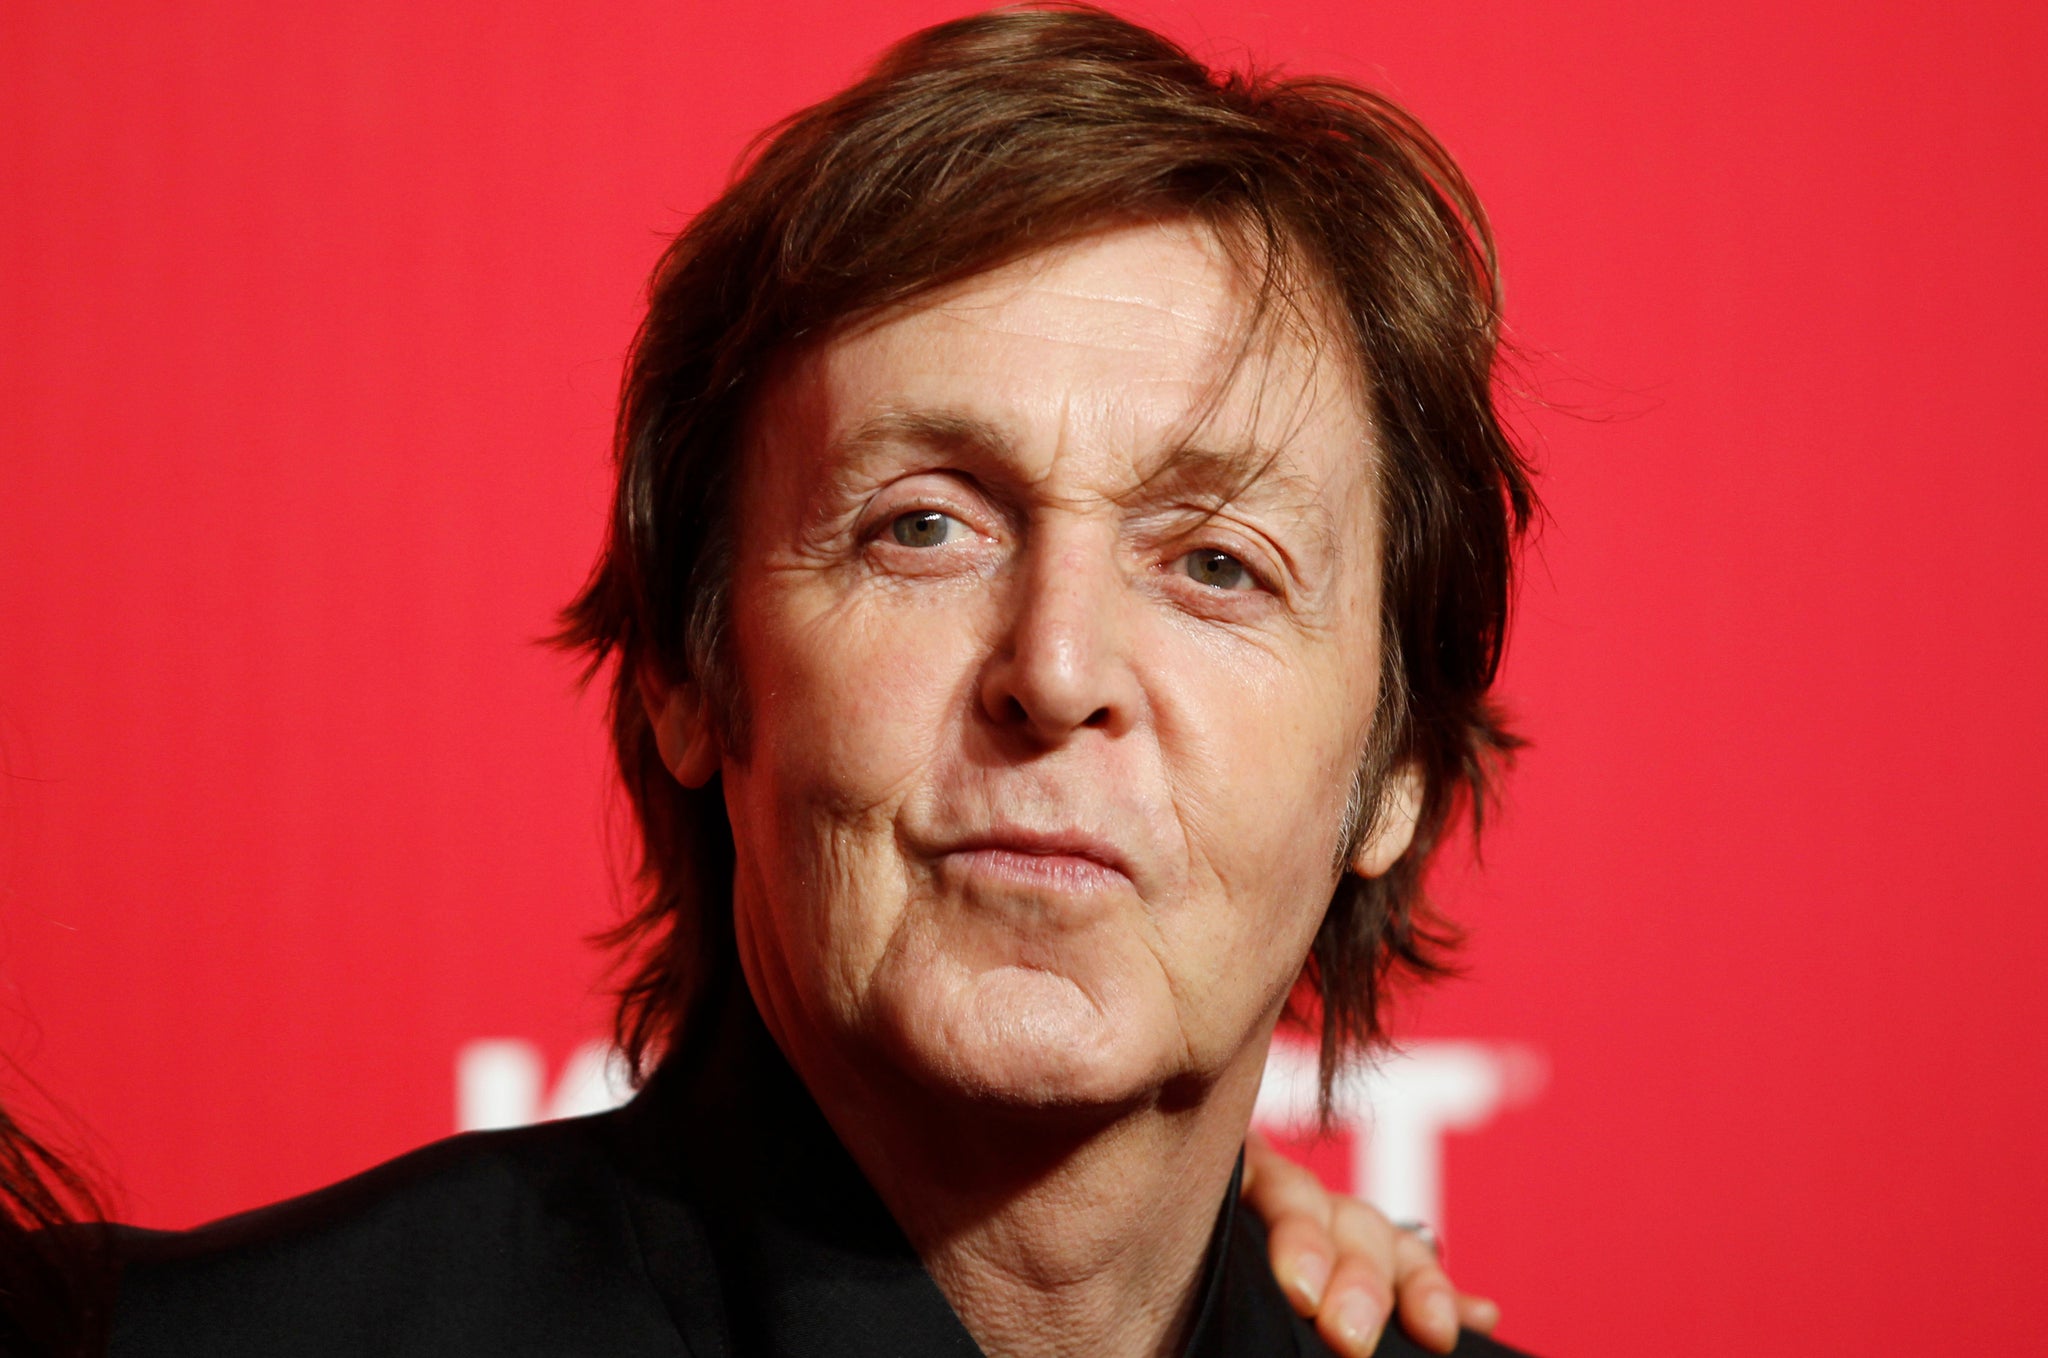 Paul McCartney backs the "no" campaign in the Scottish referendum